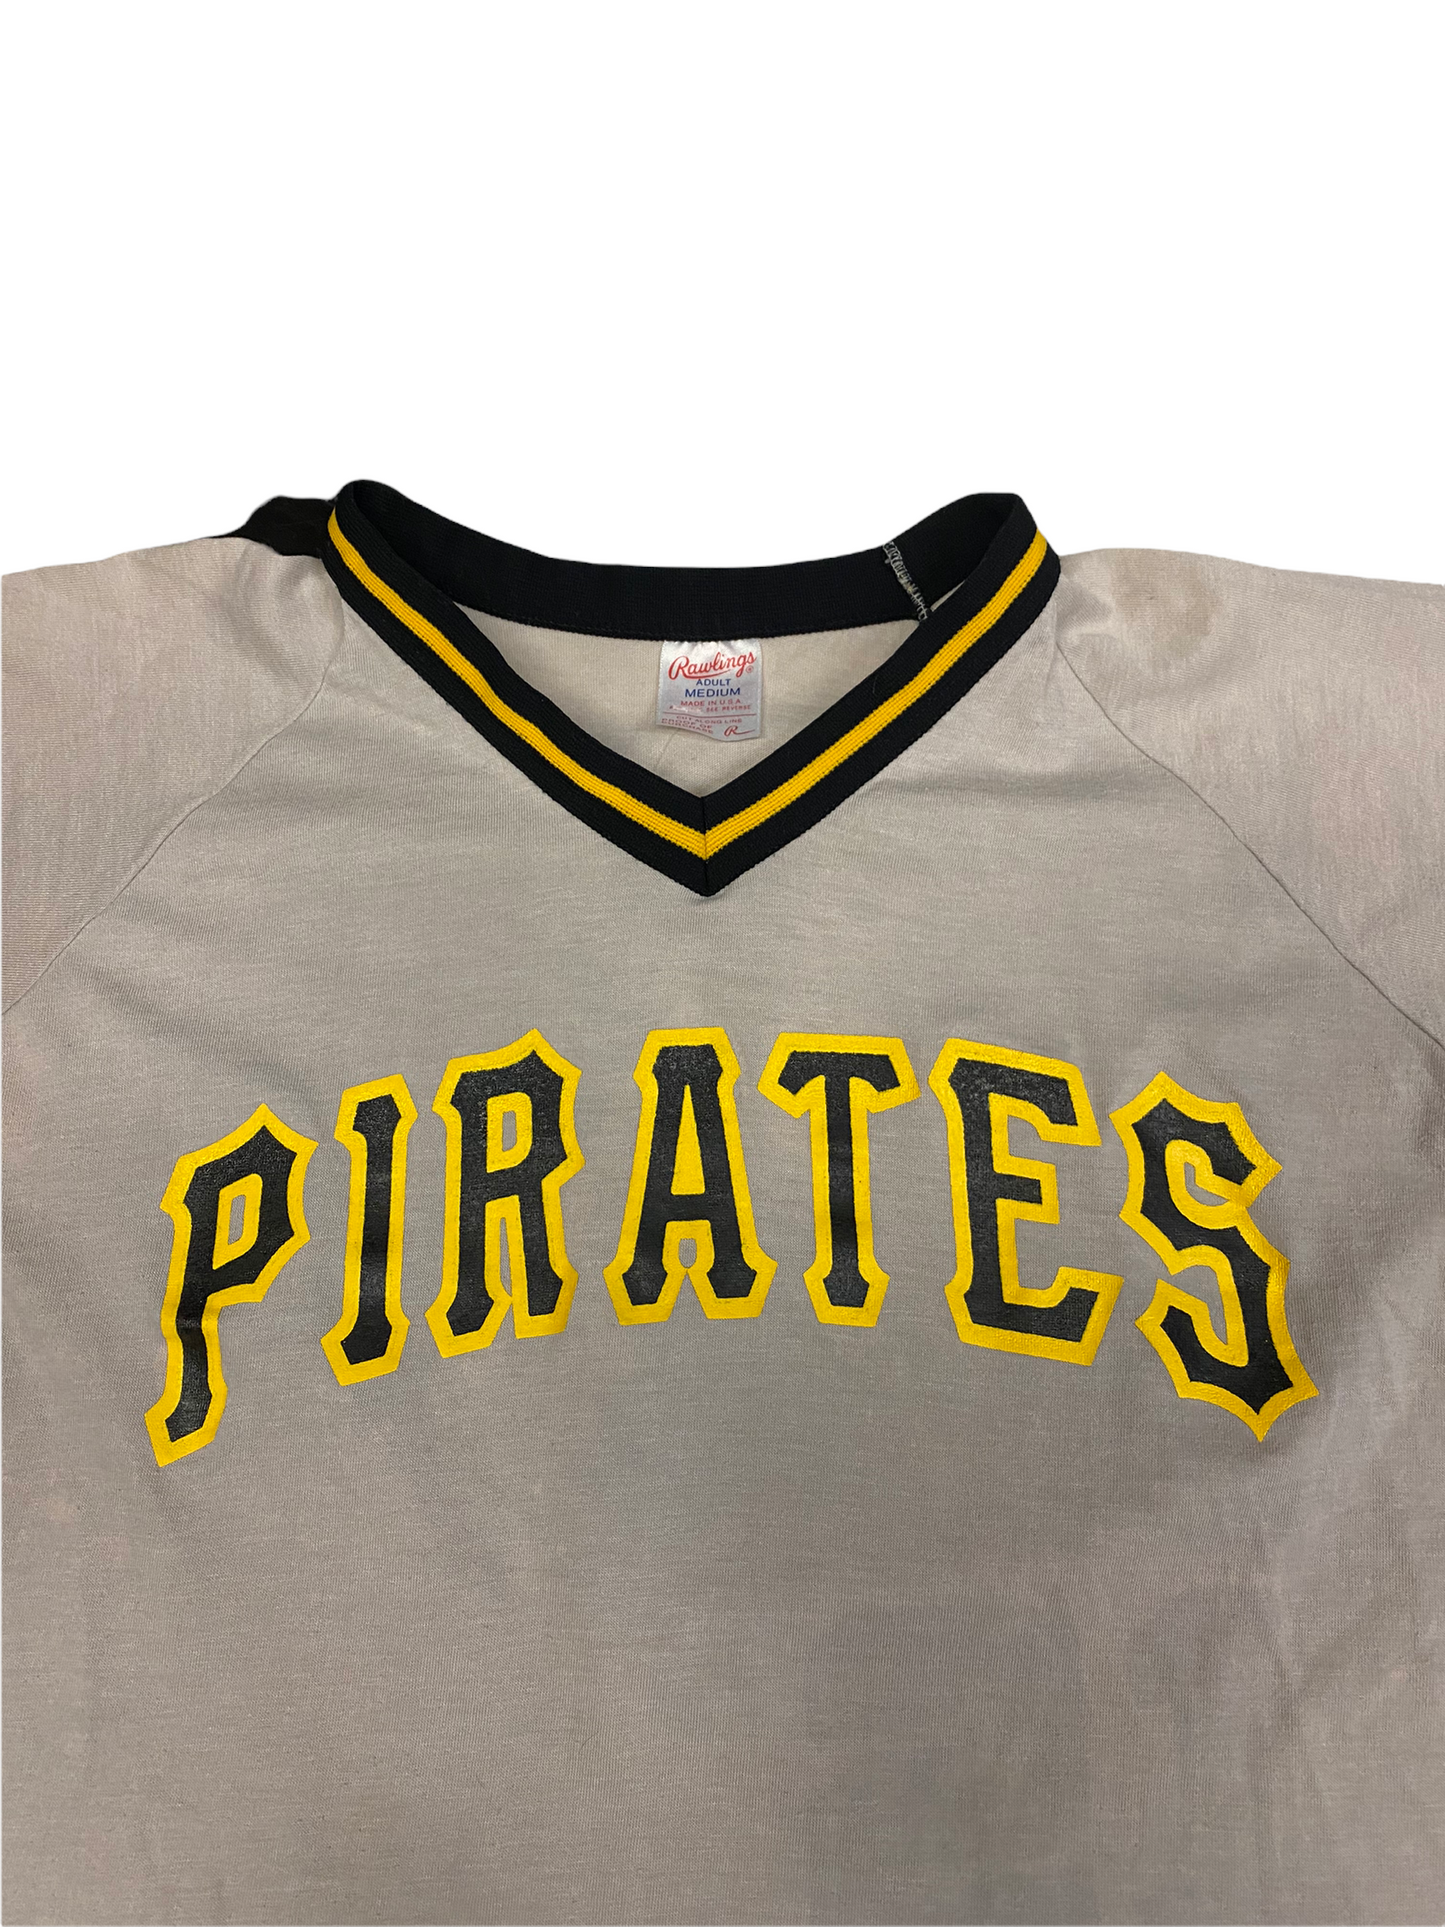 S) Vintage Pittsburgh Pirates Jersey – The Closet